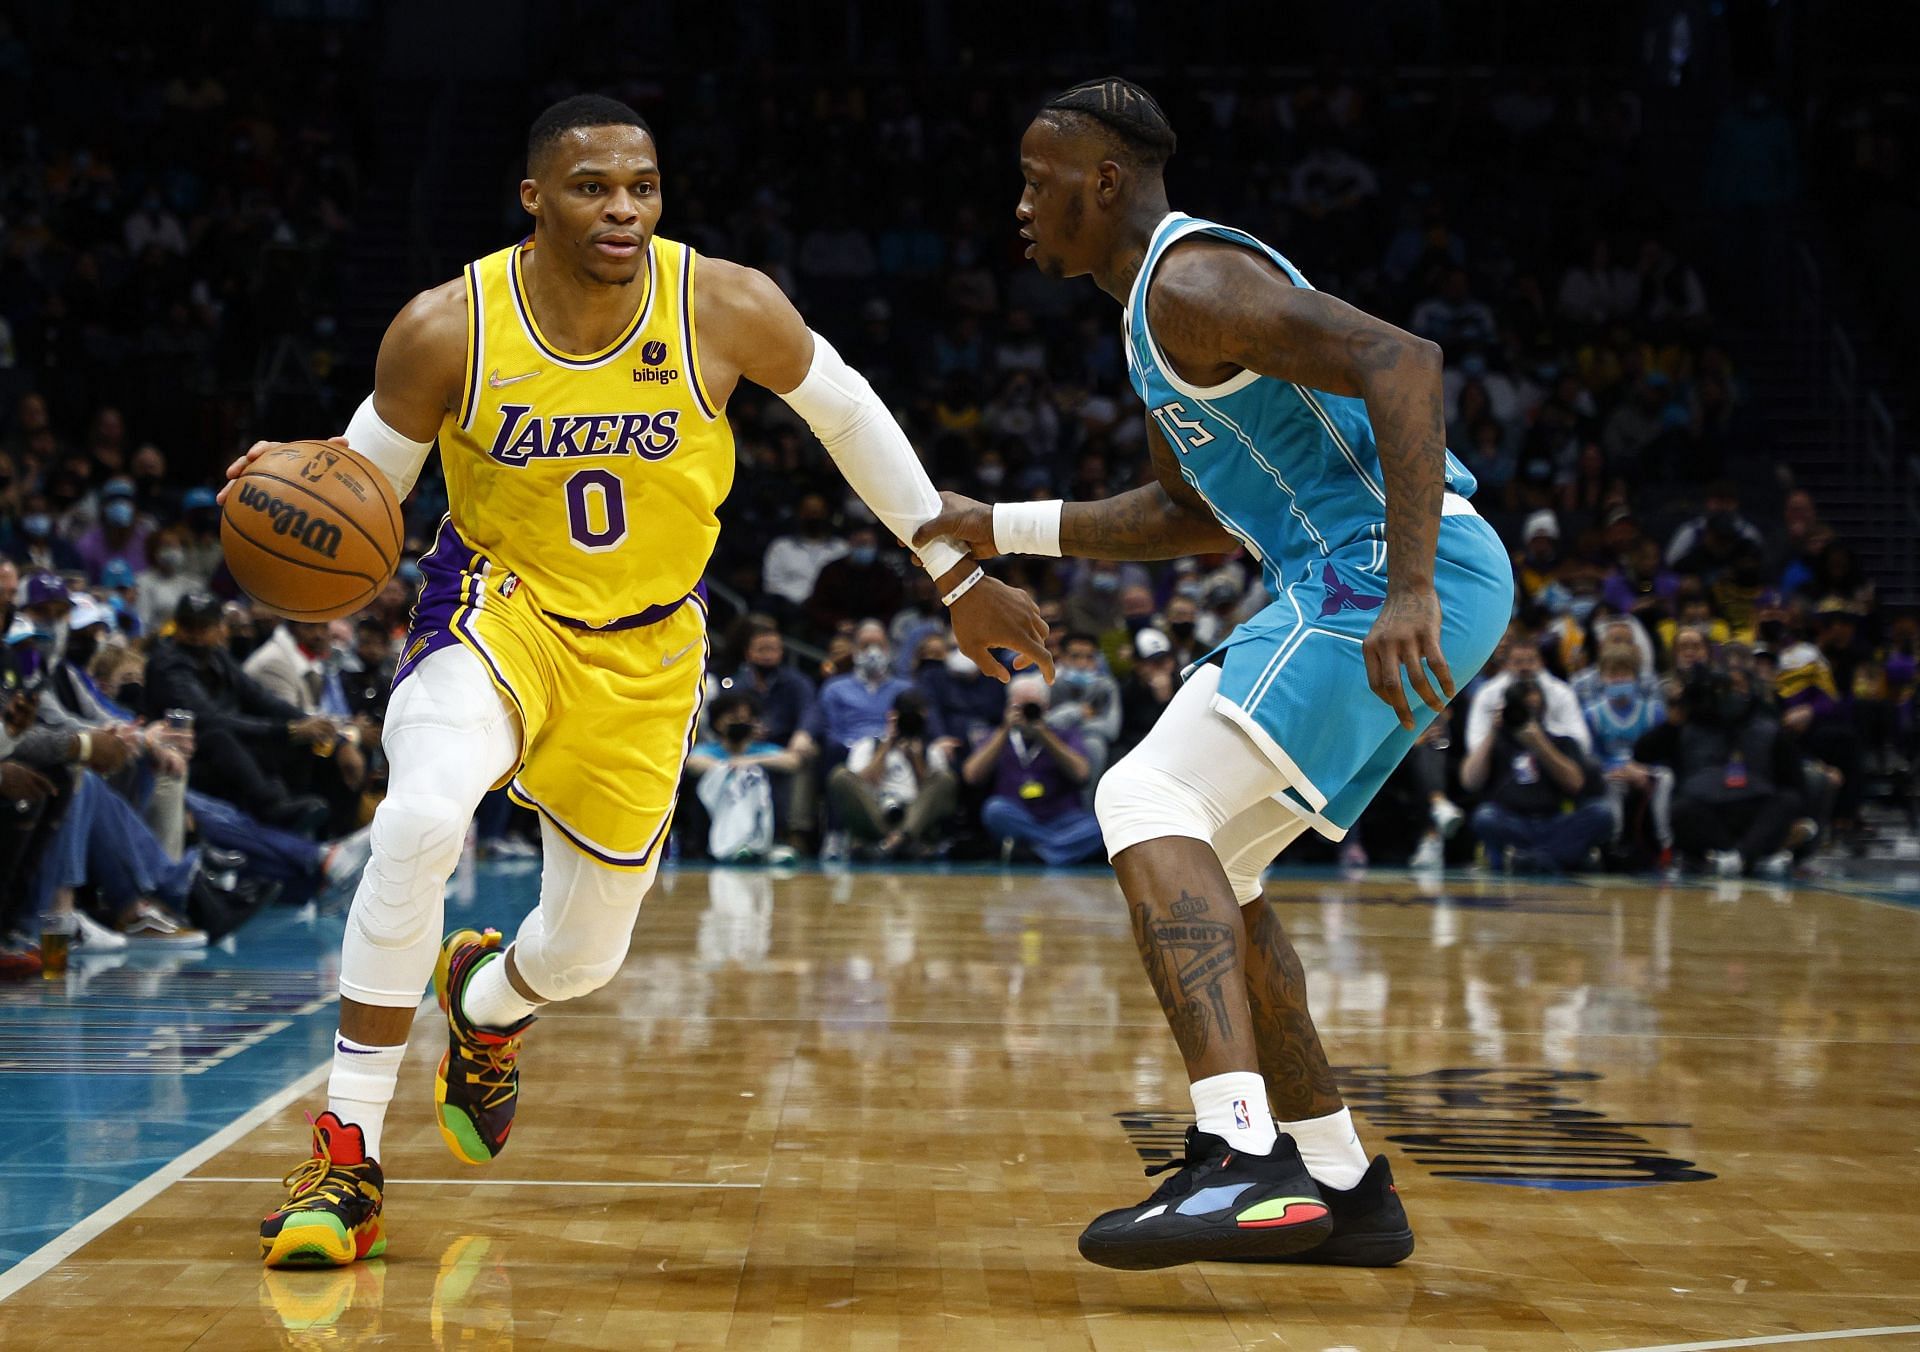 Russell Westbrook of the LA Lakers dribbles against Terry Rozier of the Charlotte Hornets.